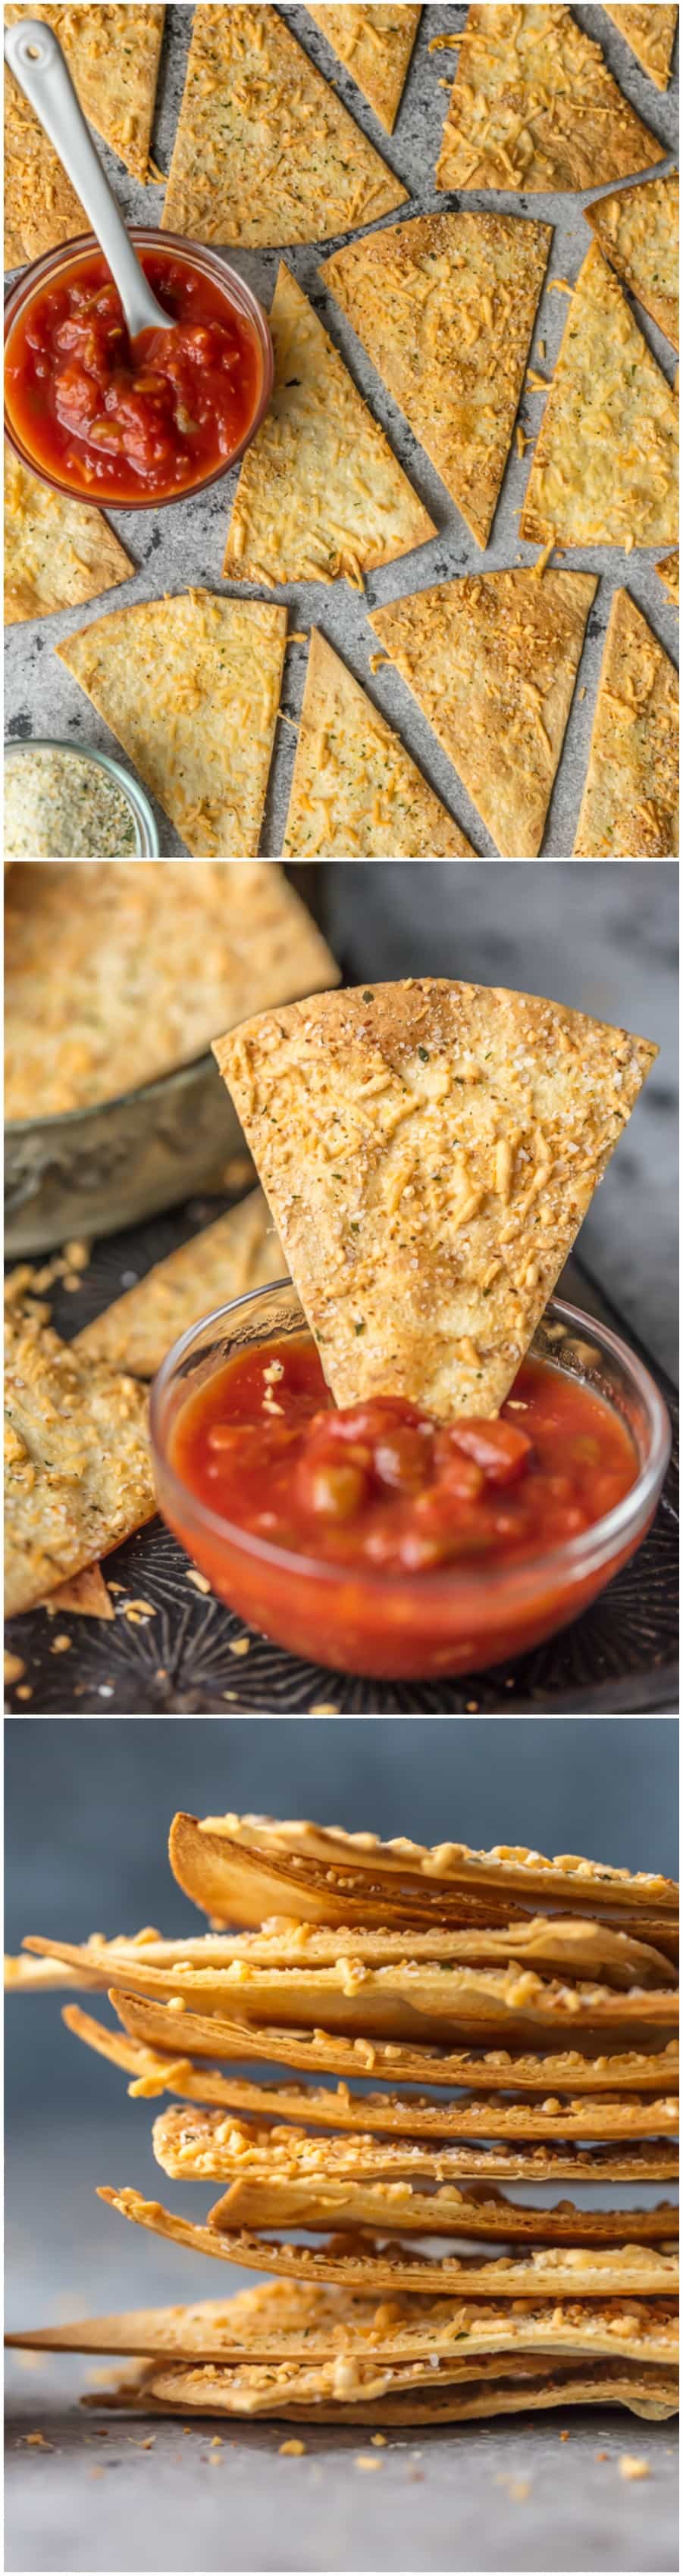 It's so easy to make these GARLIC PARMESAN HOMEMADE TORTILLA CHIPS! They're the easiest and most flavorful way to elevate chips and salsa.